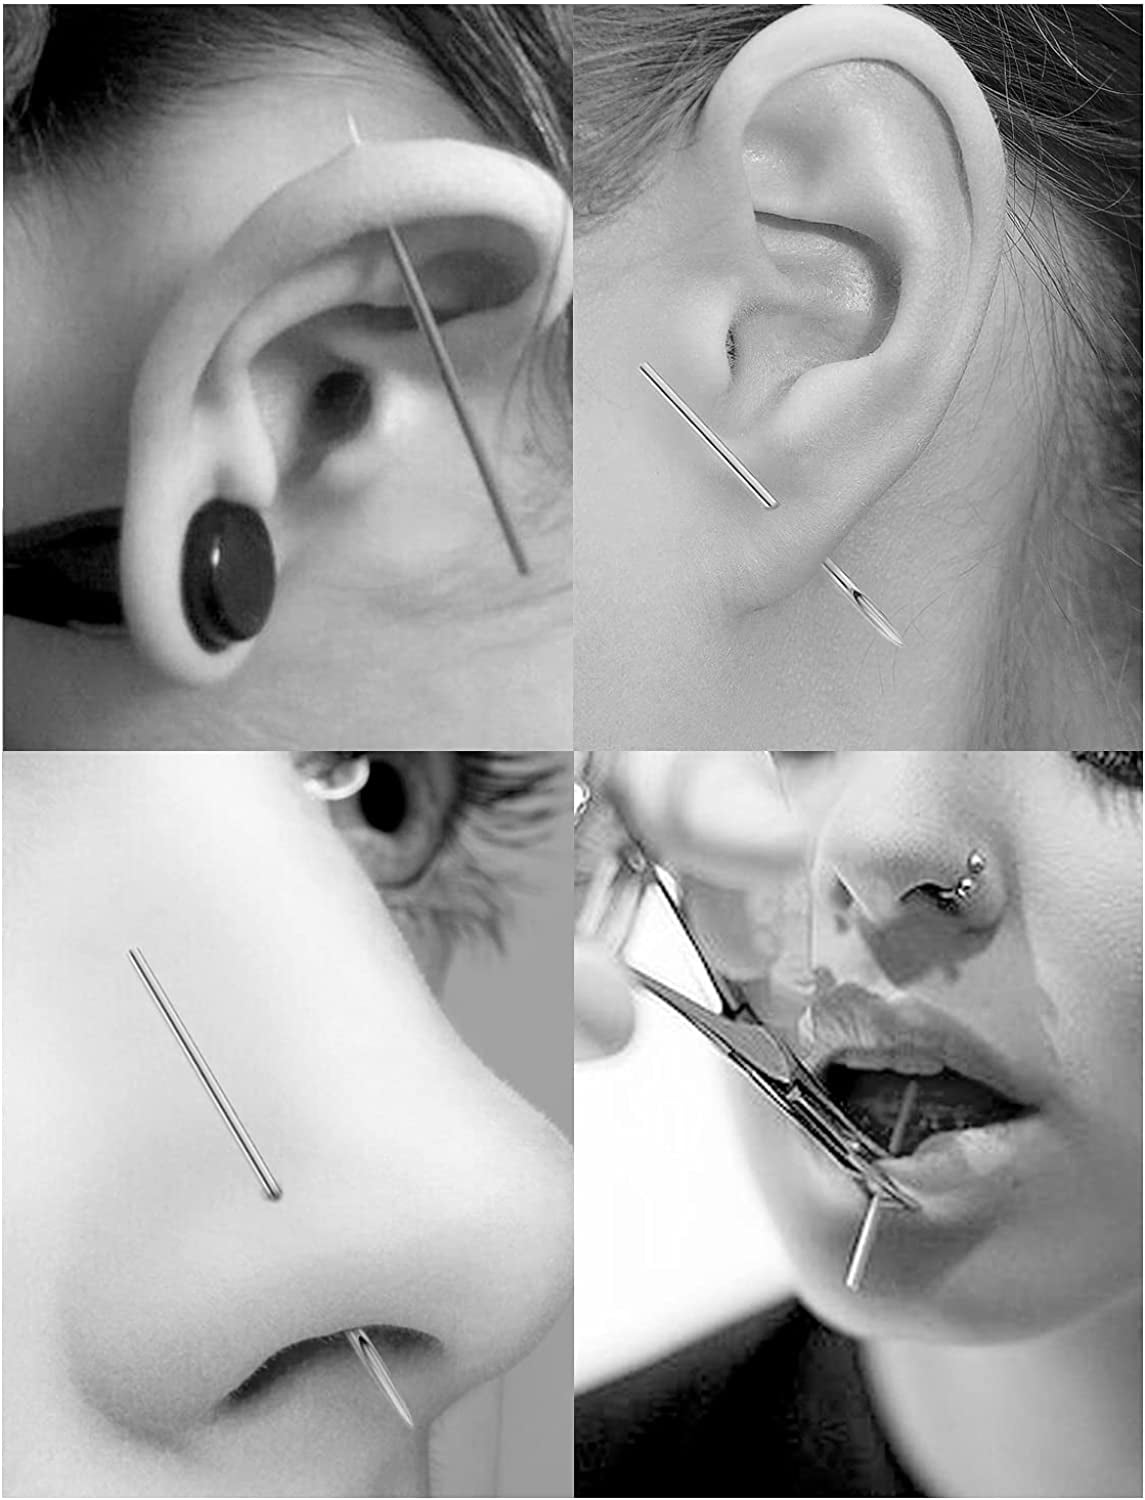 Needles - High Quality? Part 9 – Needles - Rogue Piercing